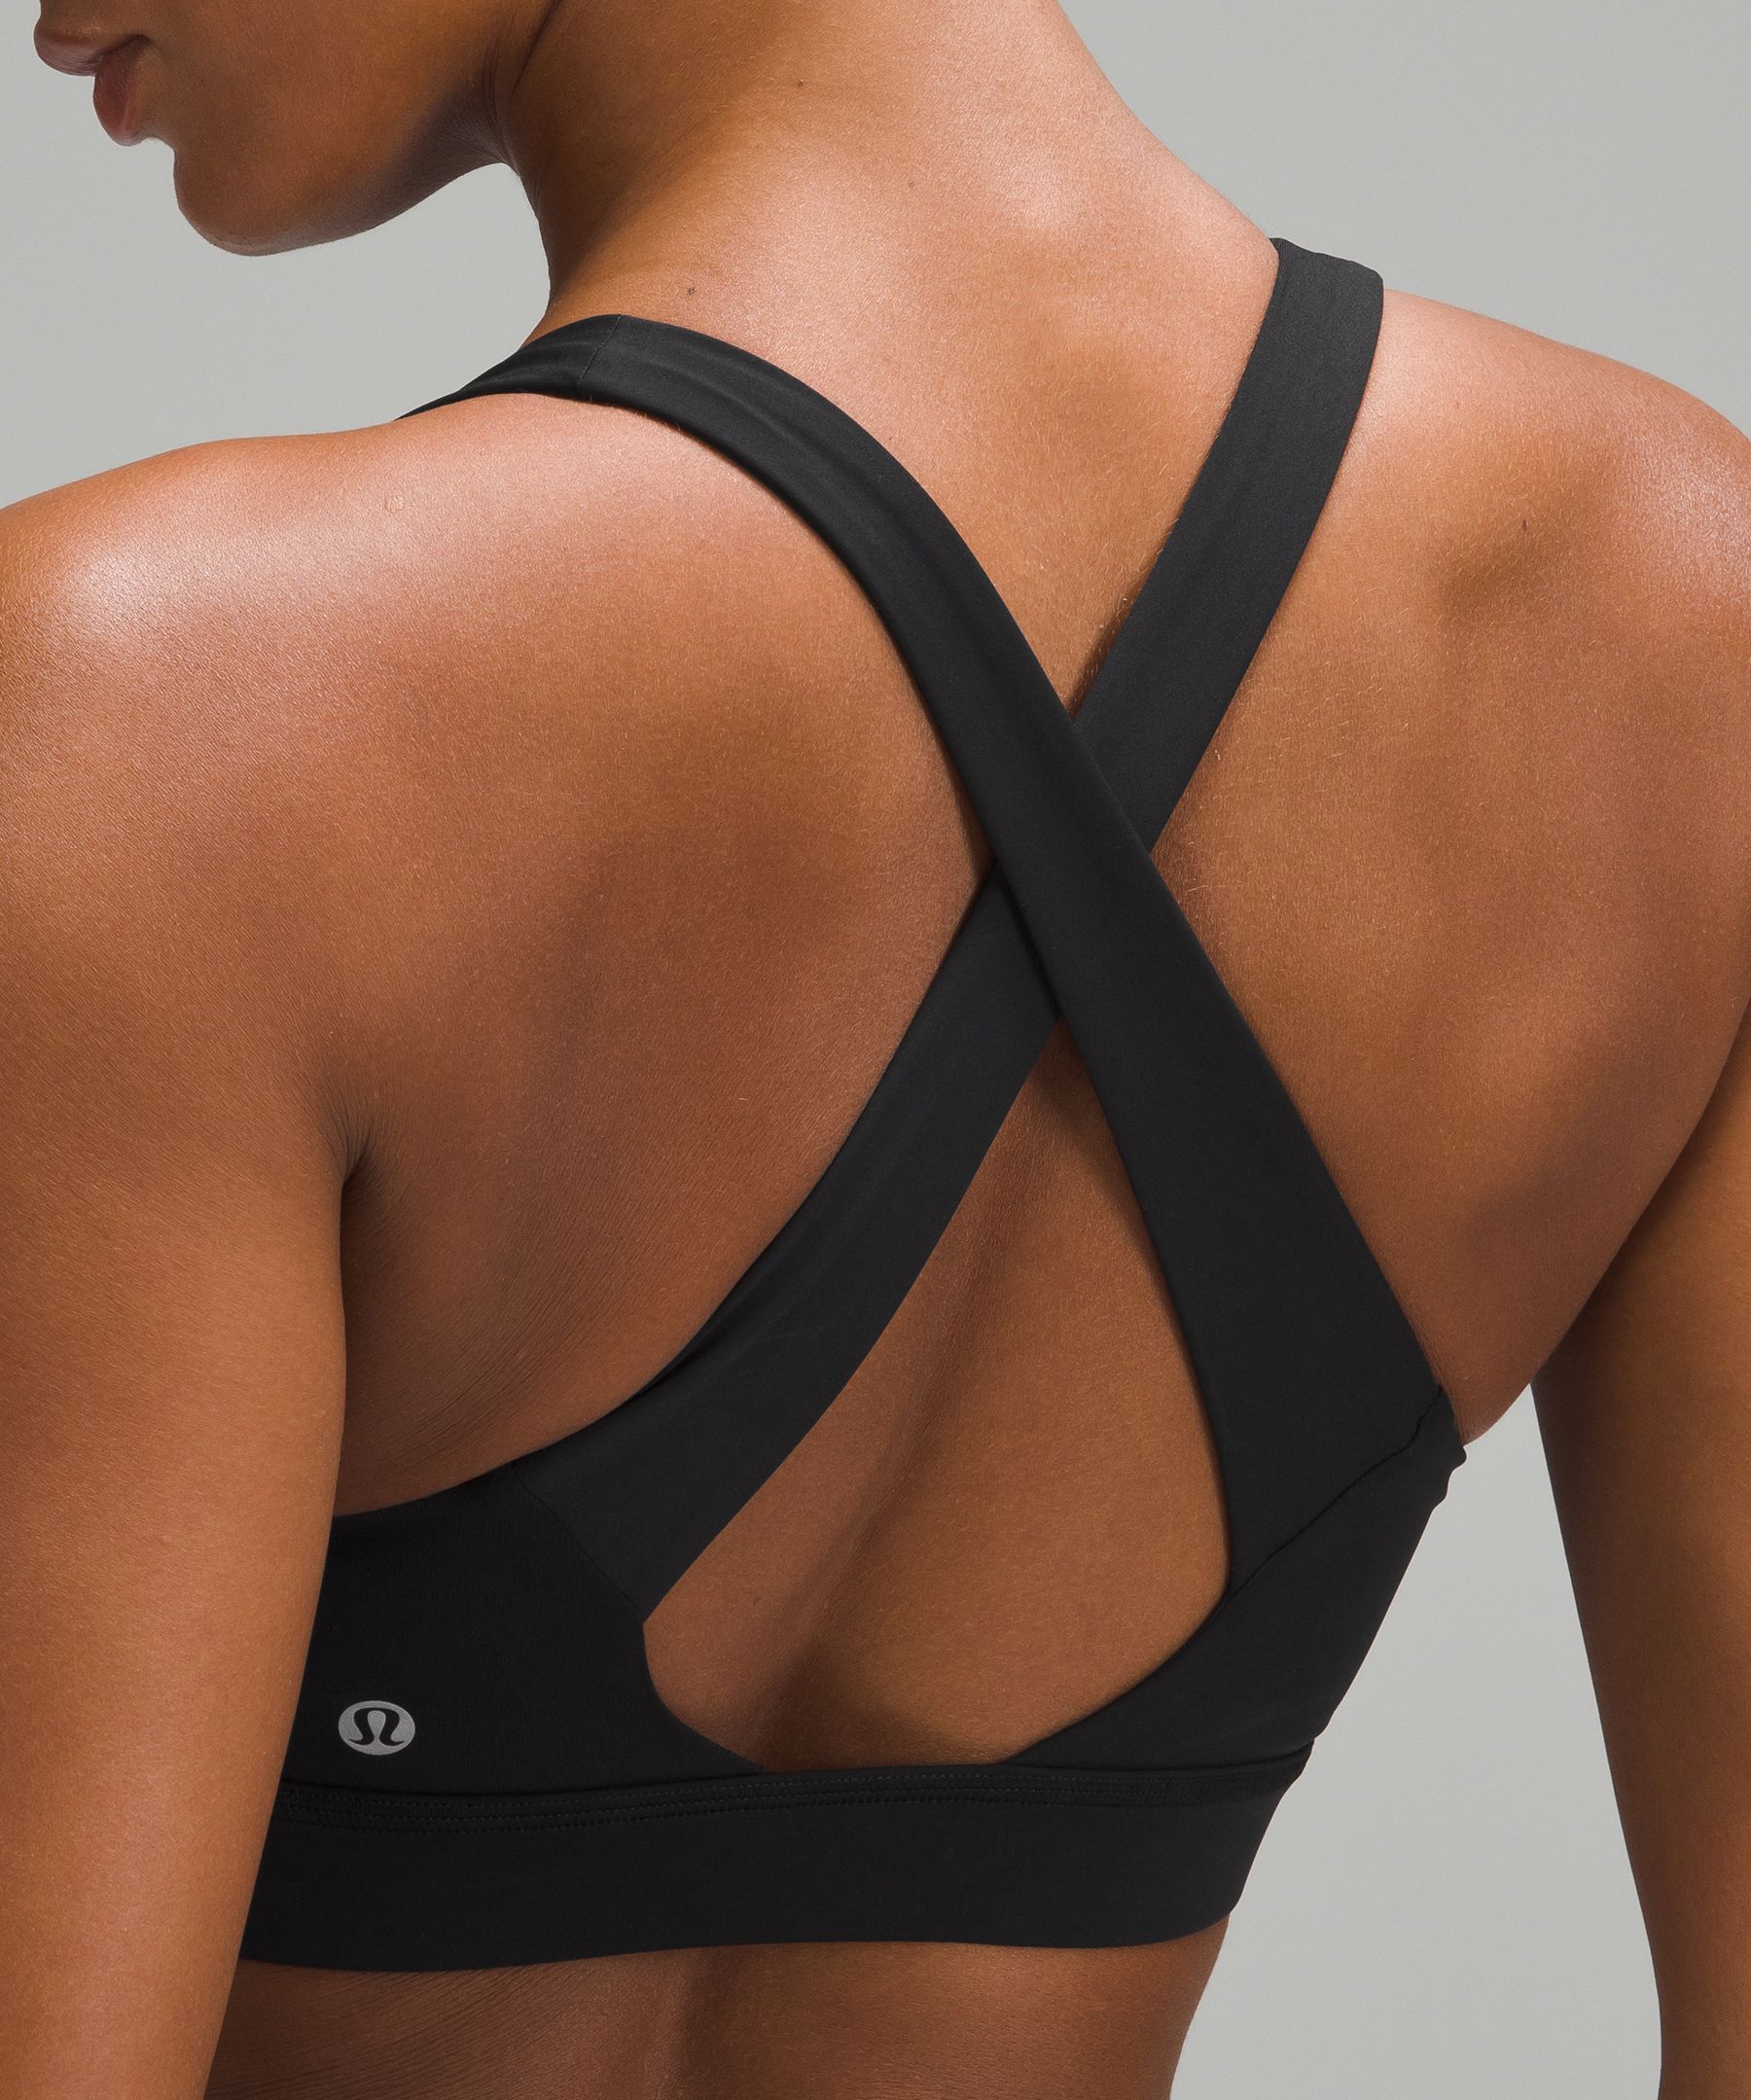 Lululemon Sports Bra White Size 32 B - $35 (41% Off Retail) - From molly